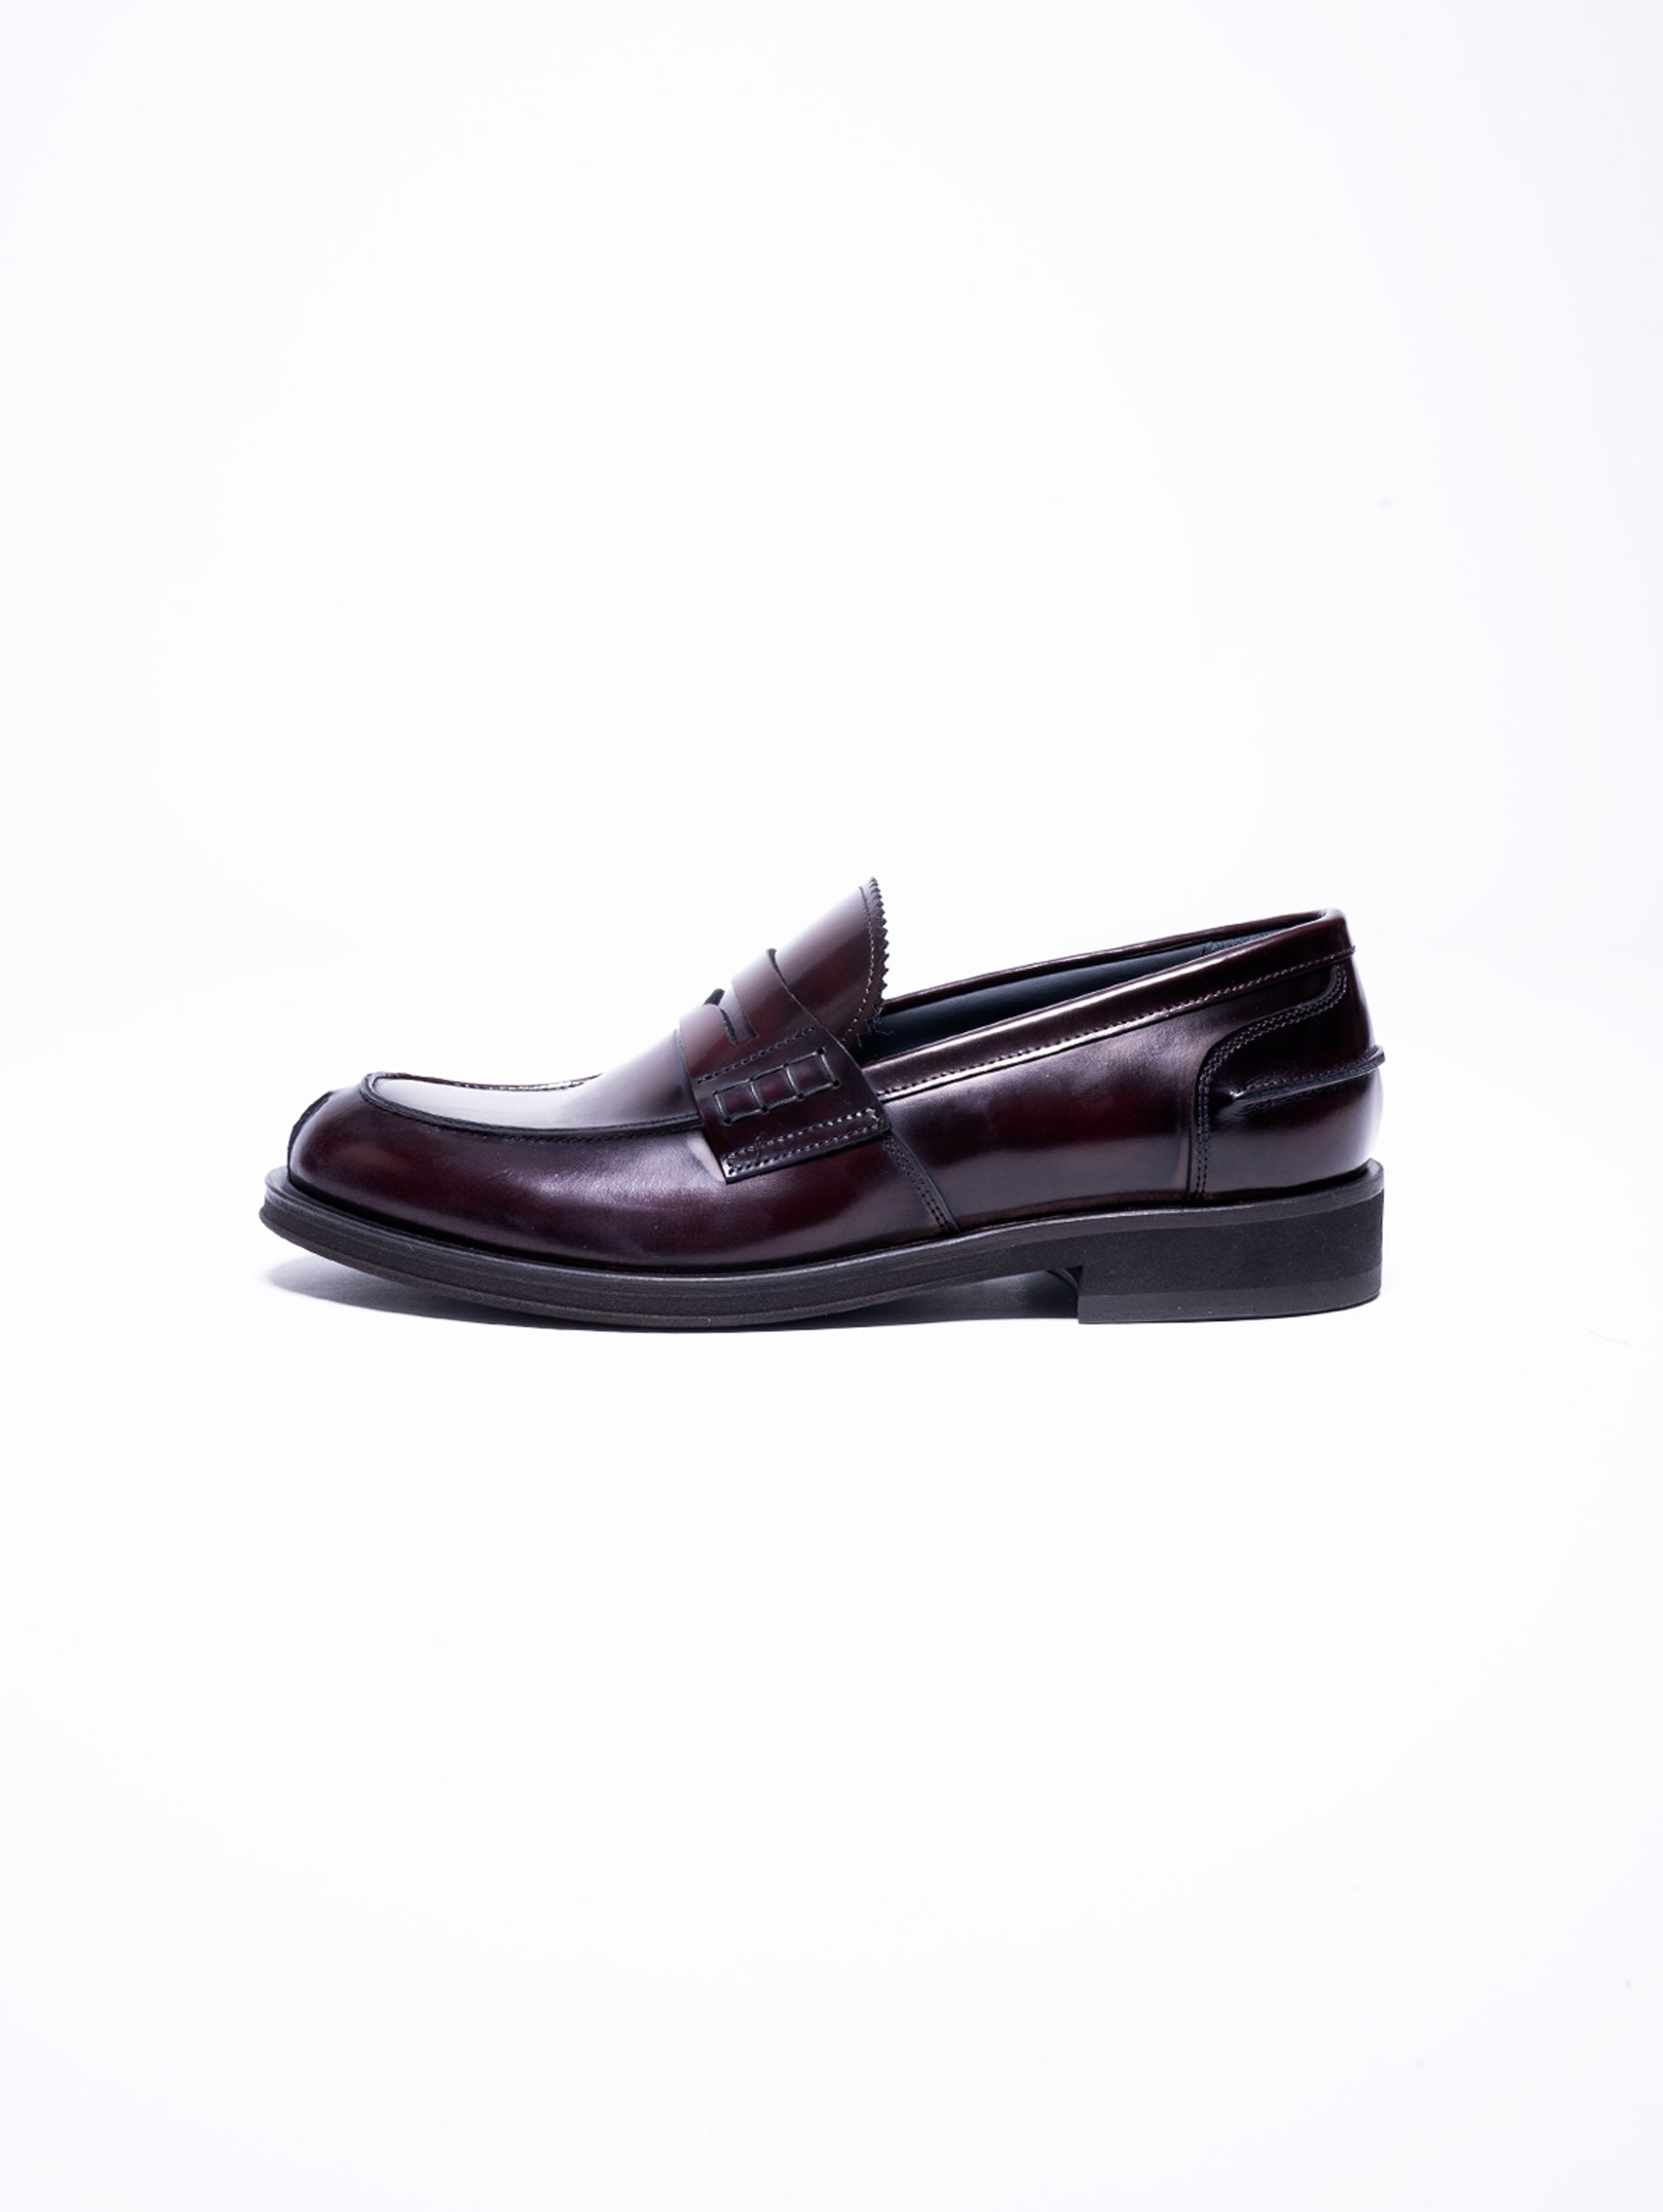 GEORGE HOL'S-Mocassino Penny Loafer in Abrasivato Bordeaux-TRYME Shop